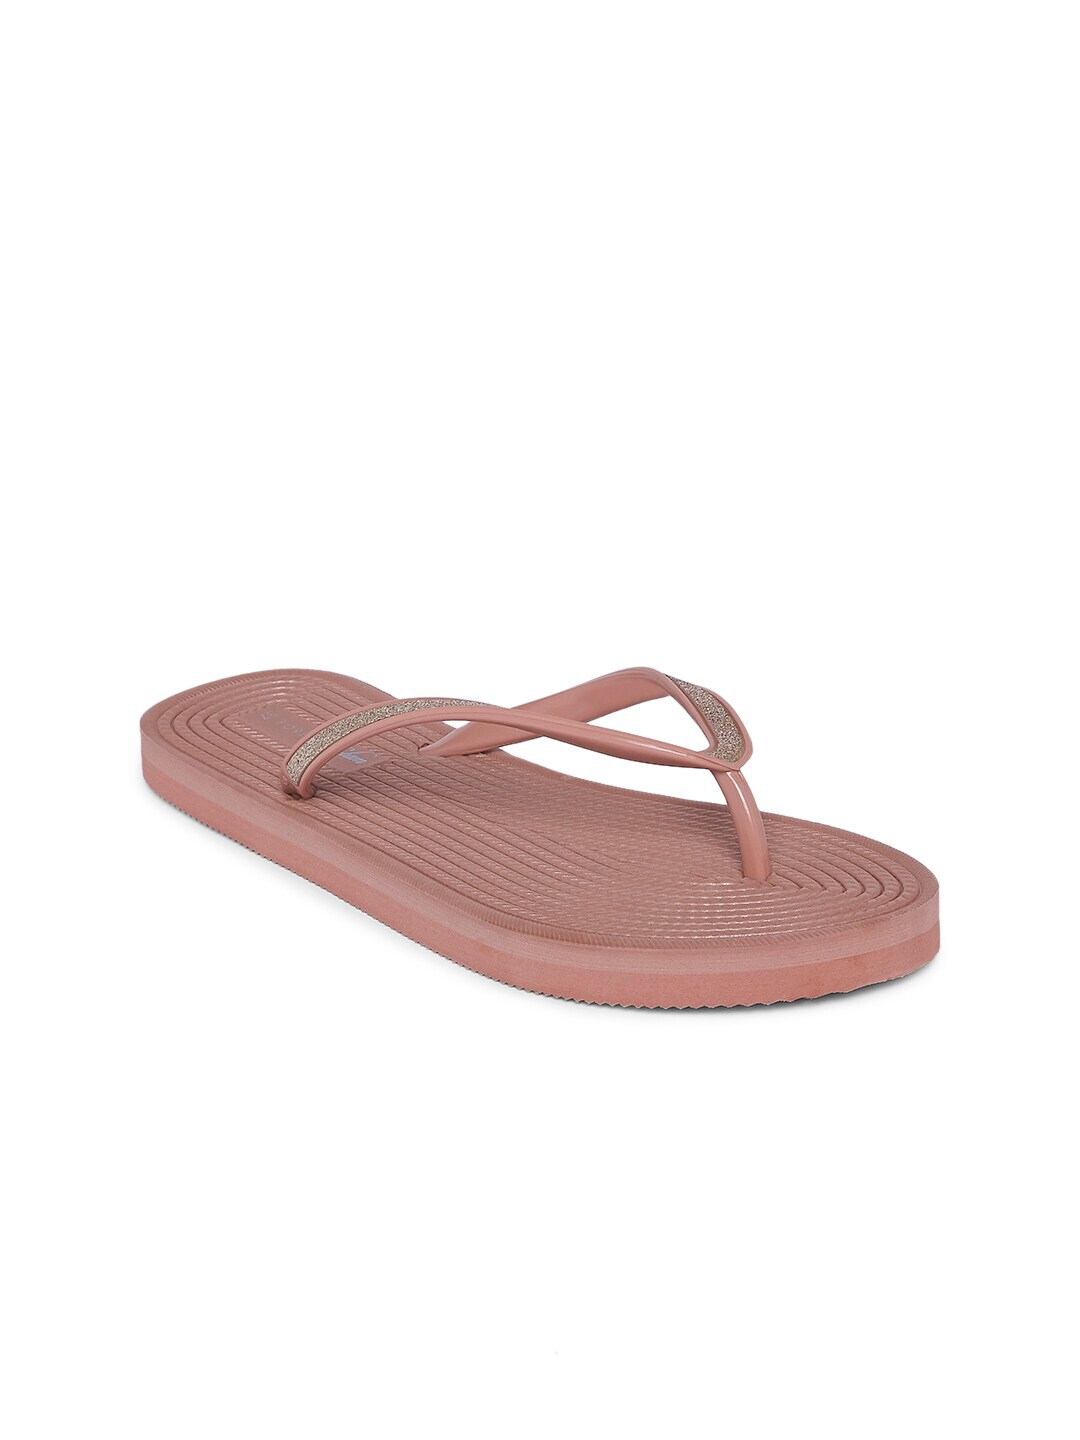 Forever Glam by Pantaloons Women Rose & Silver-Toned Embellished Thong Flip-Flops Price in India